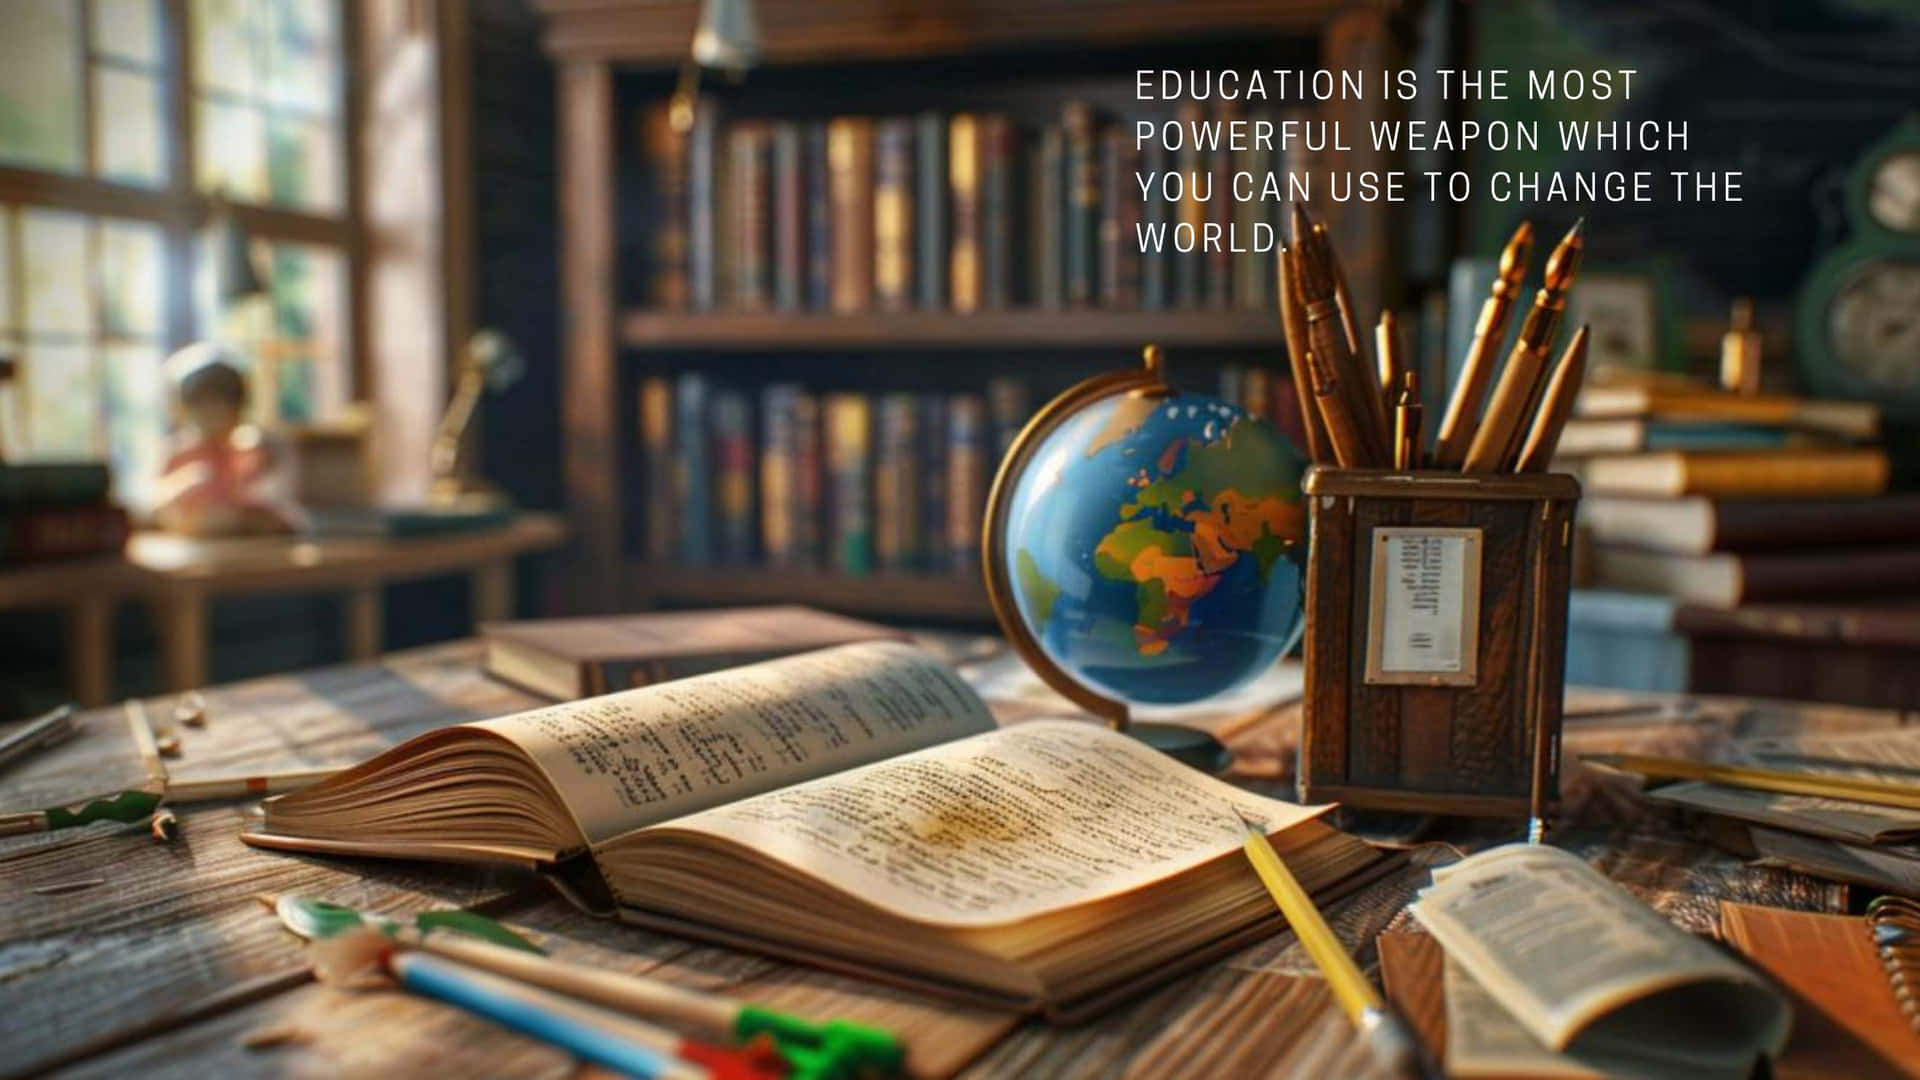 Education Change The World Quote Wallpaper